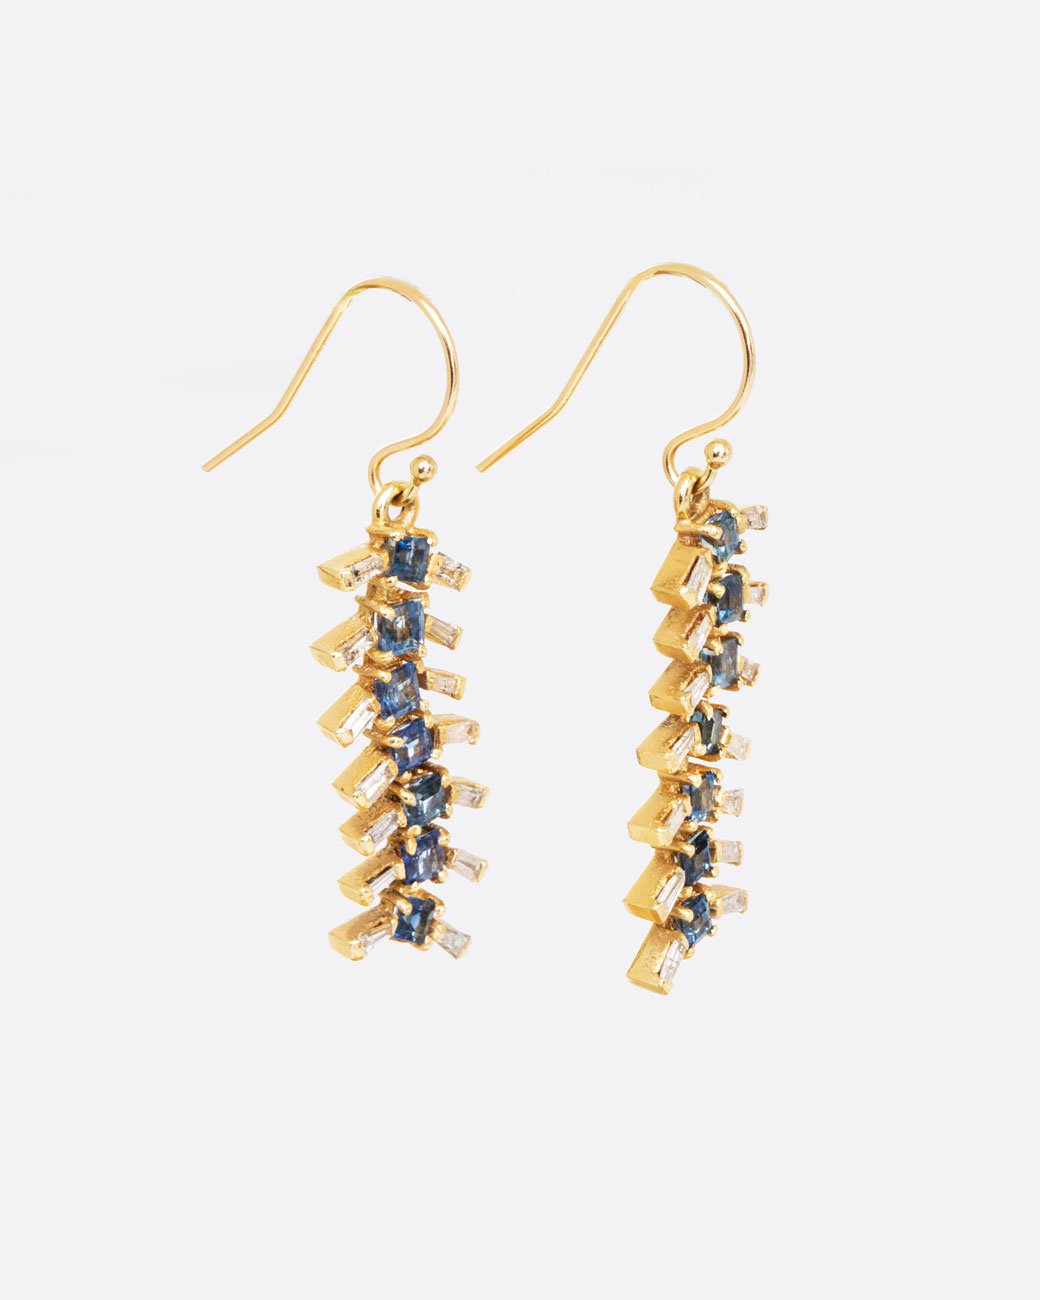 14k yellow gold centipede earrings with blue sapphire and diamond baguettes, shown from the side.